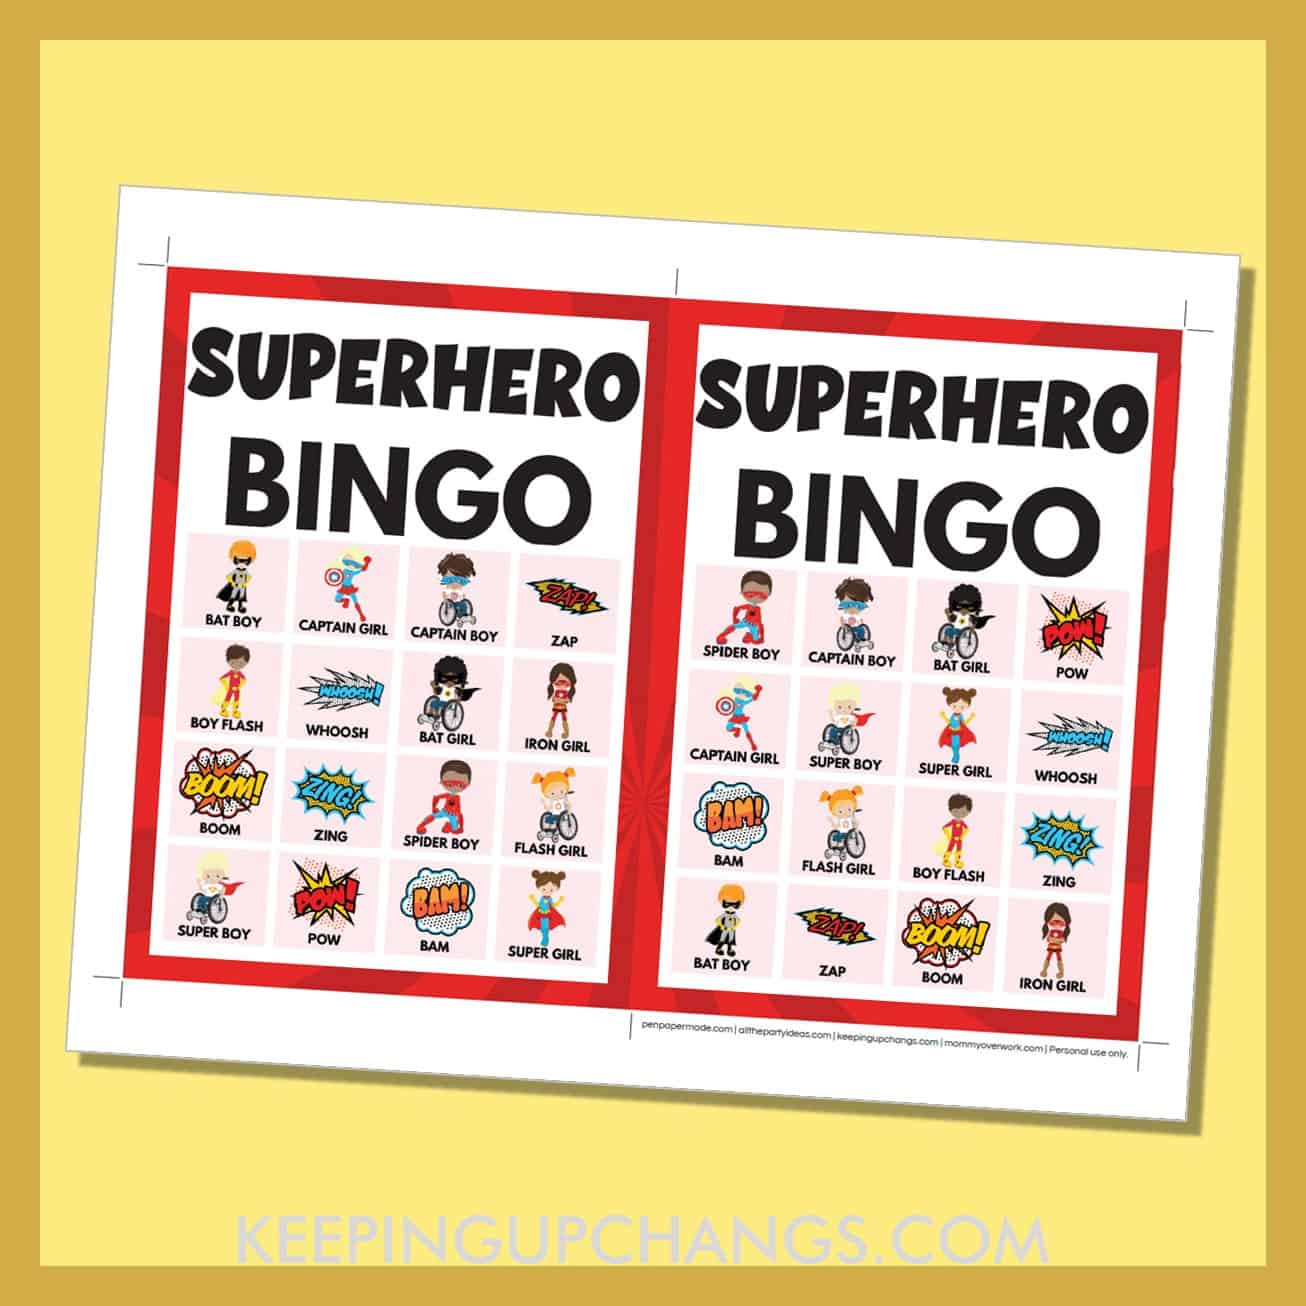 free superhero bingo card 4x4 5x7 game boards with images and text words.